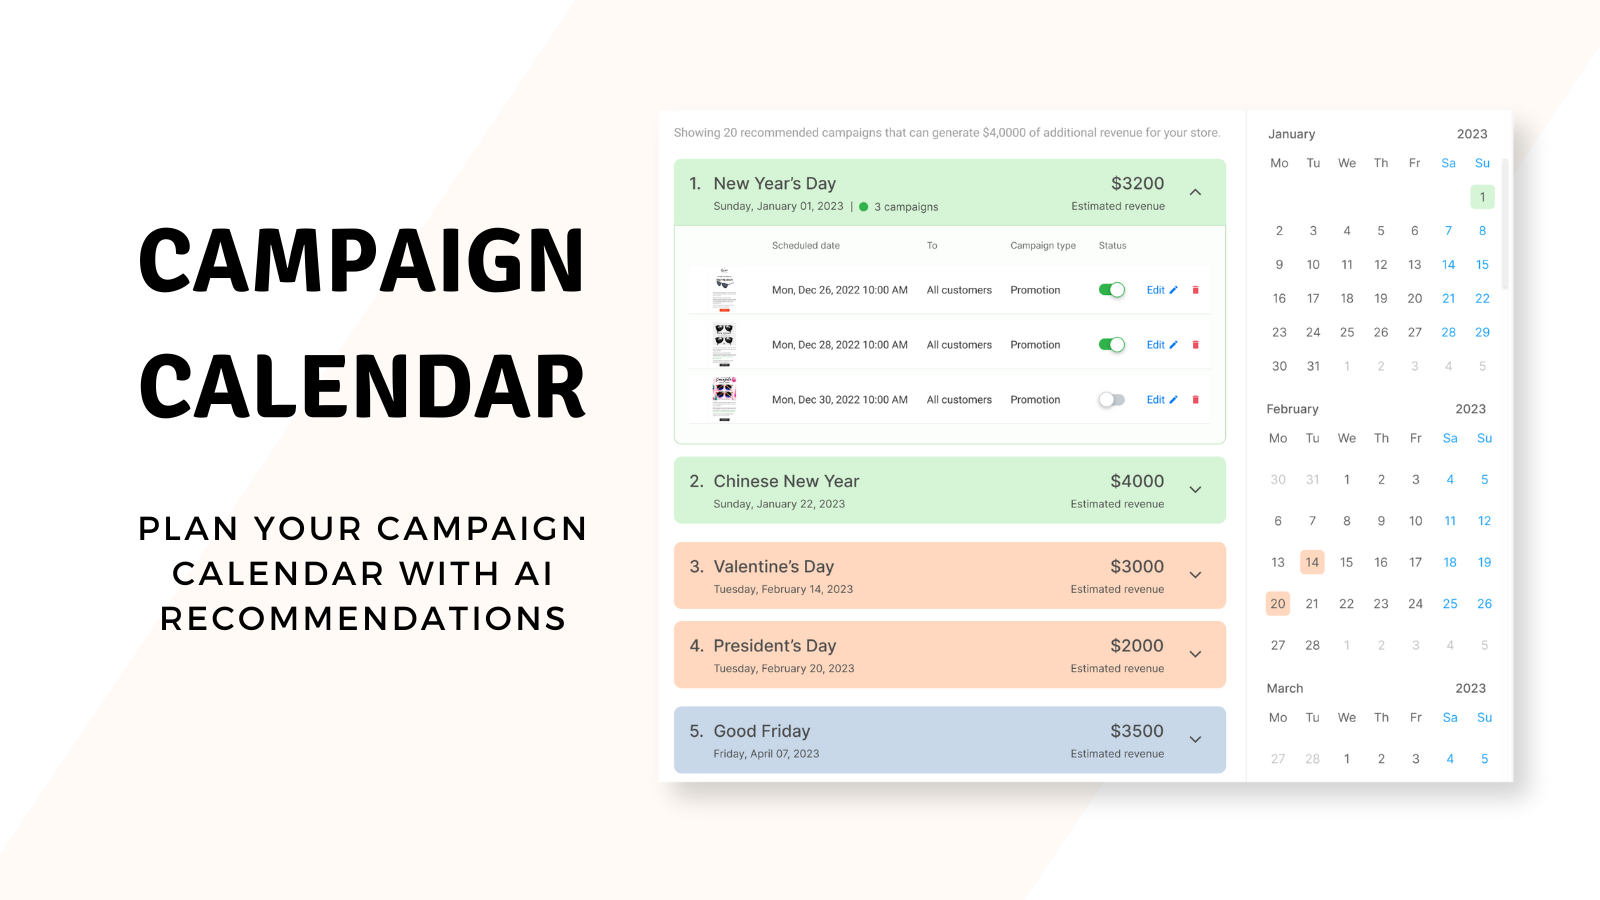 Plan your Campaign Calendar with AI recommendations